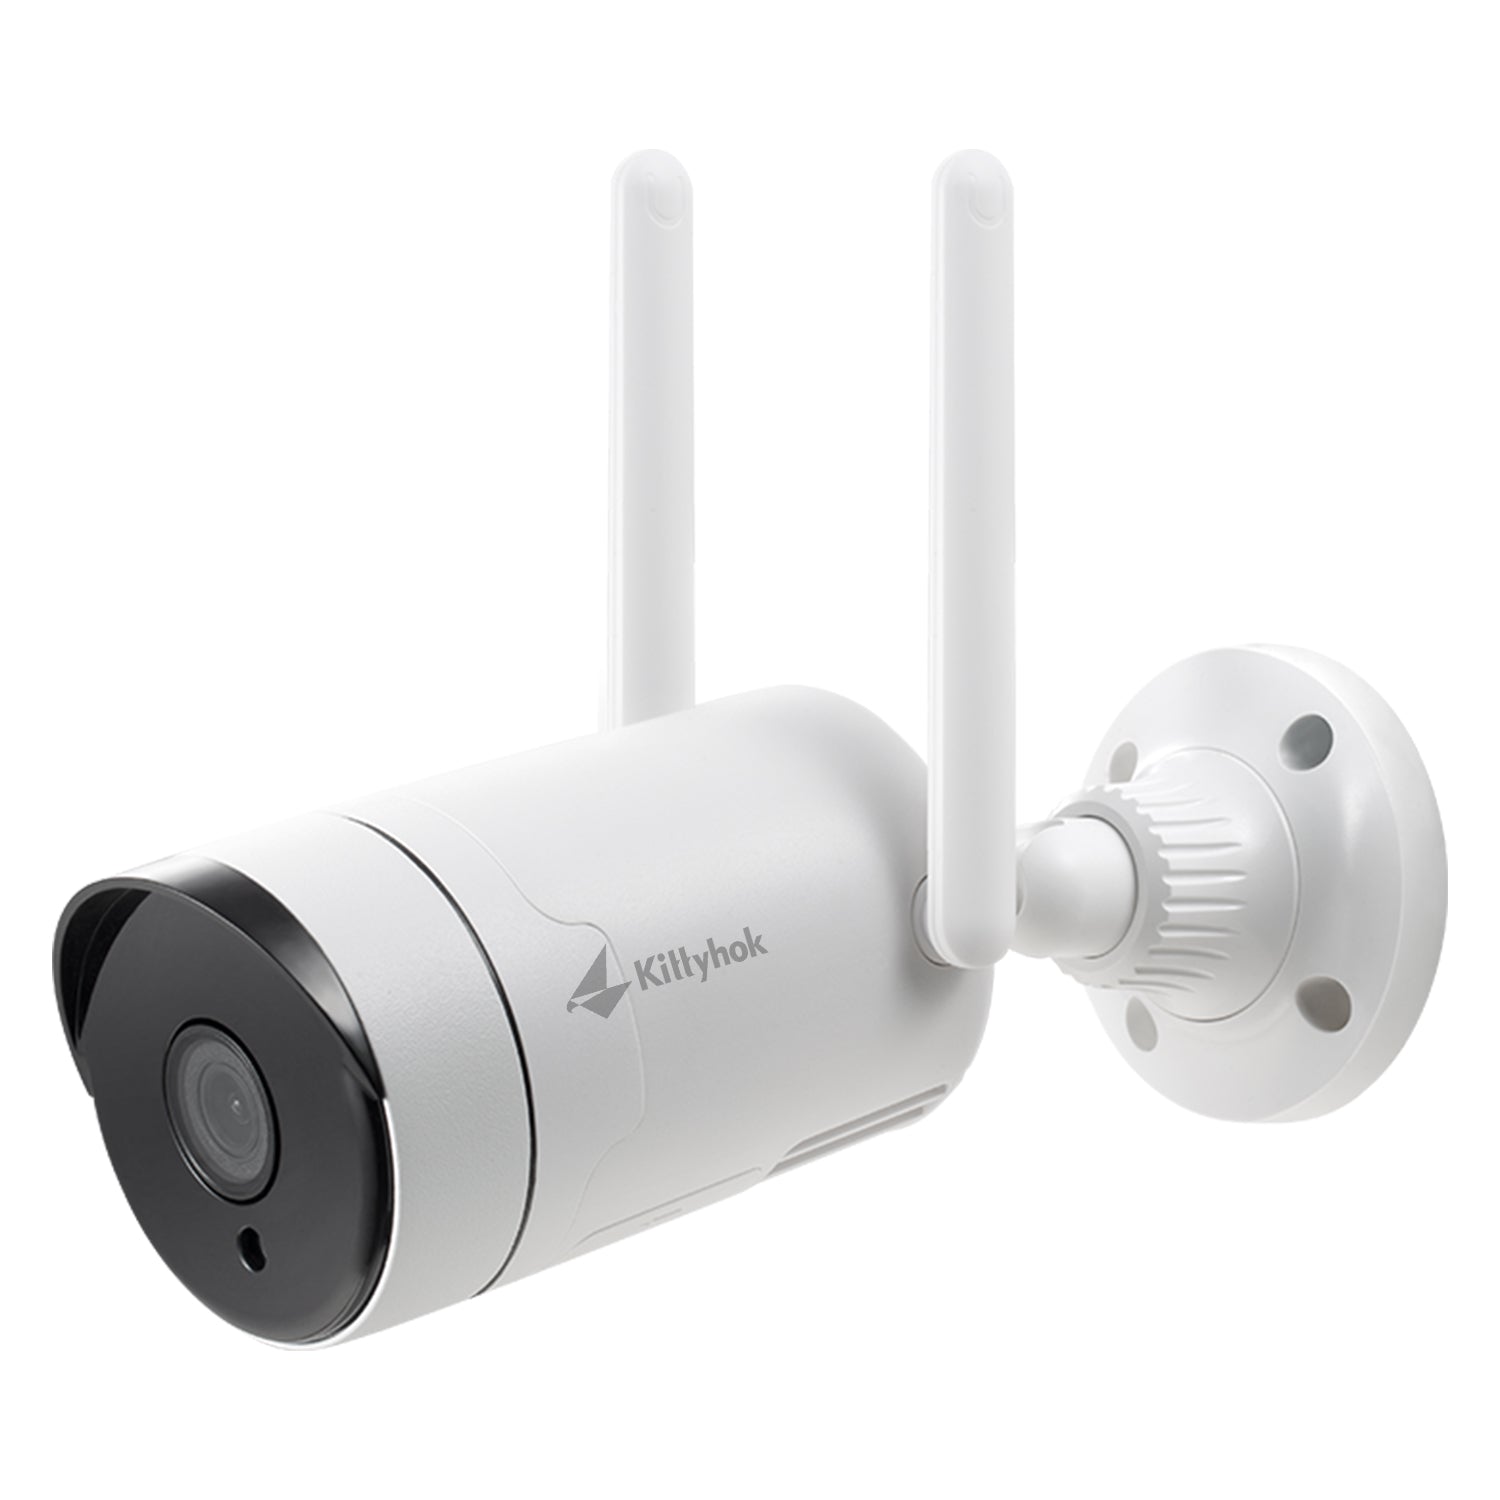 2K FHD Wireless Security Camera with 2 Way Audio